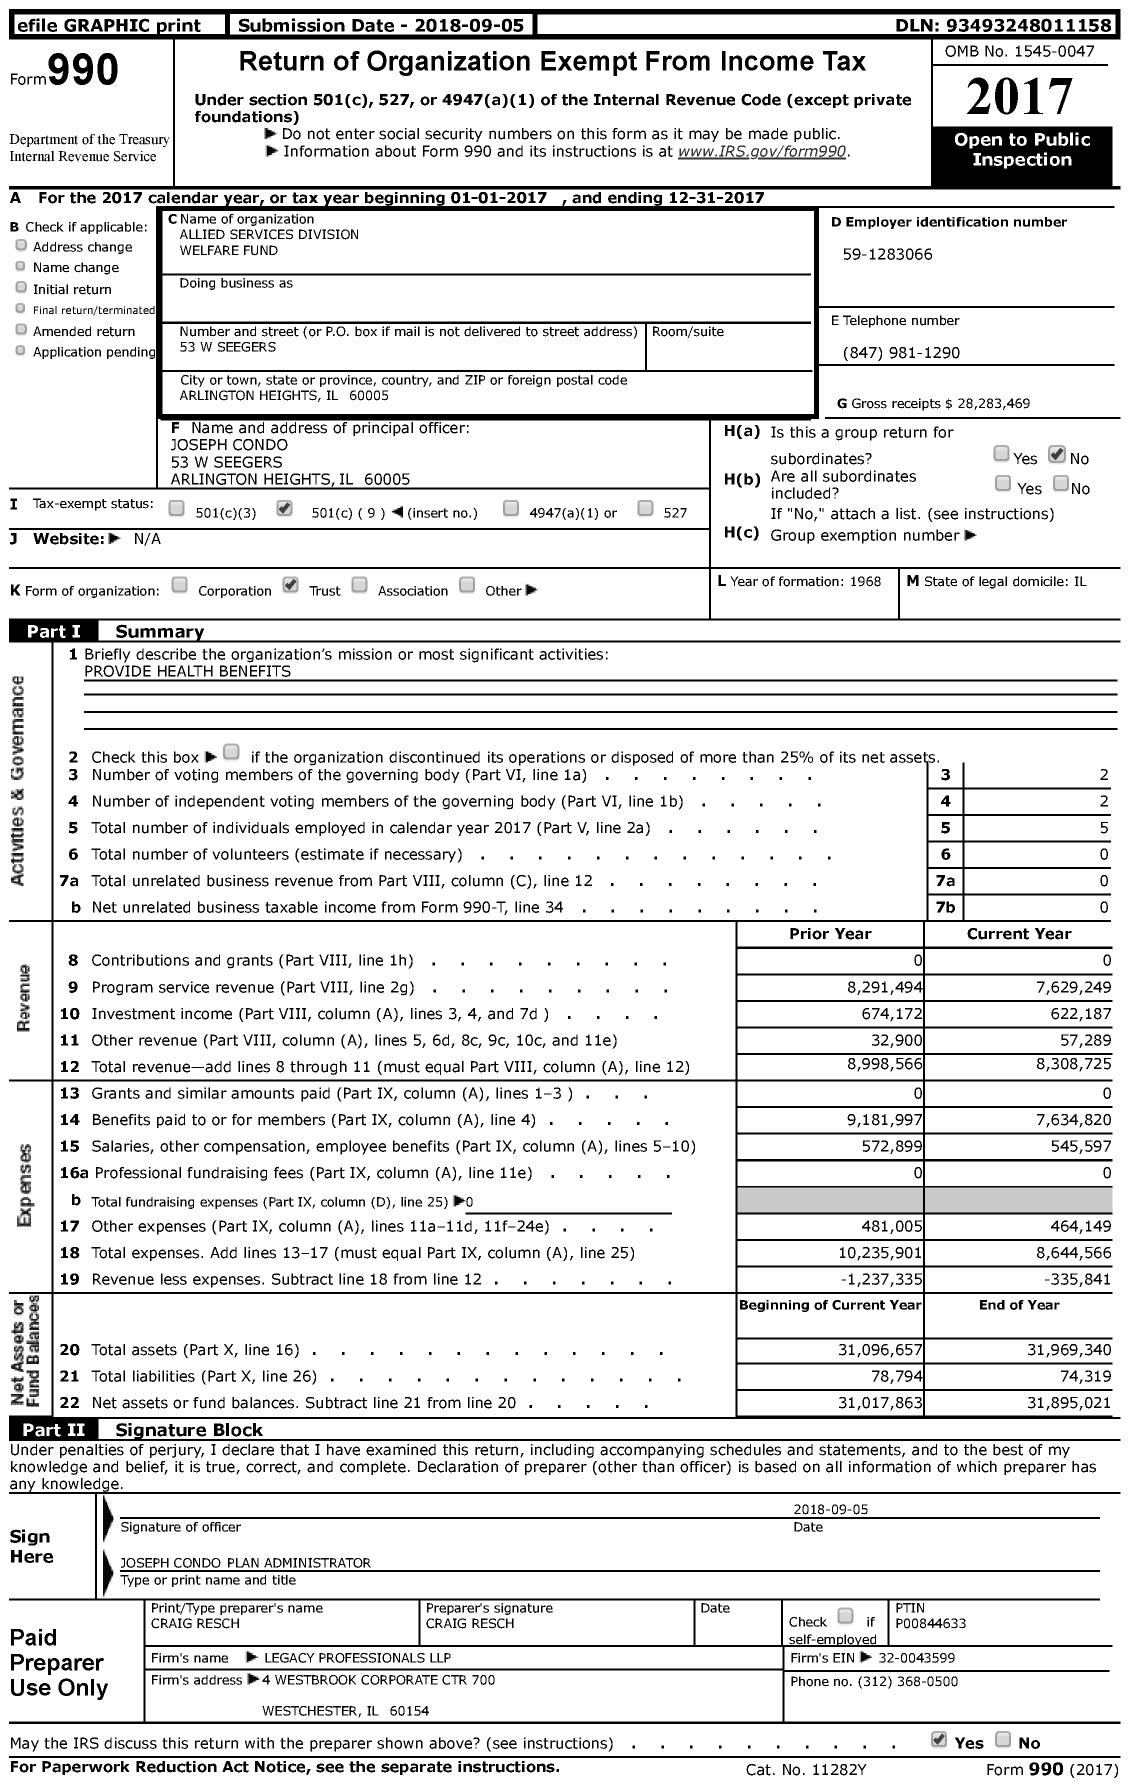 Image of first page of 2017 Form 990 for Allied Services Division Welfare Fund